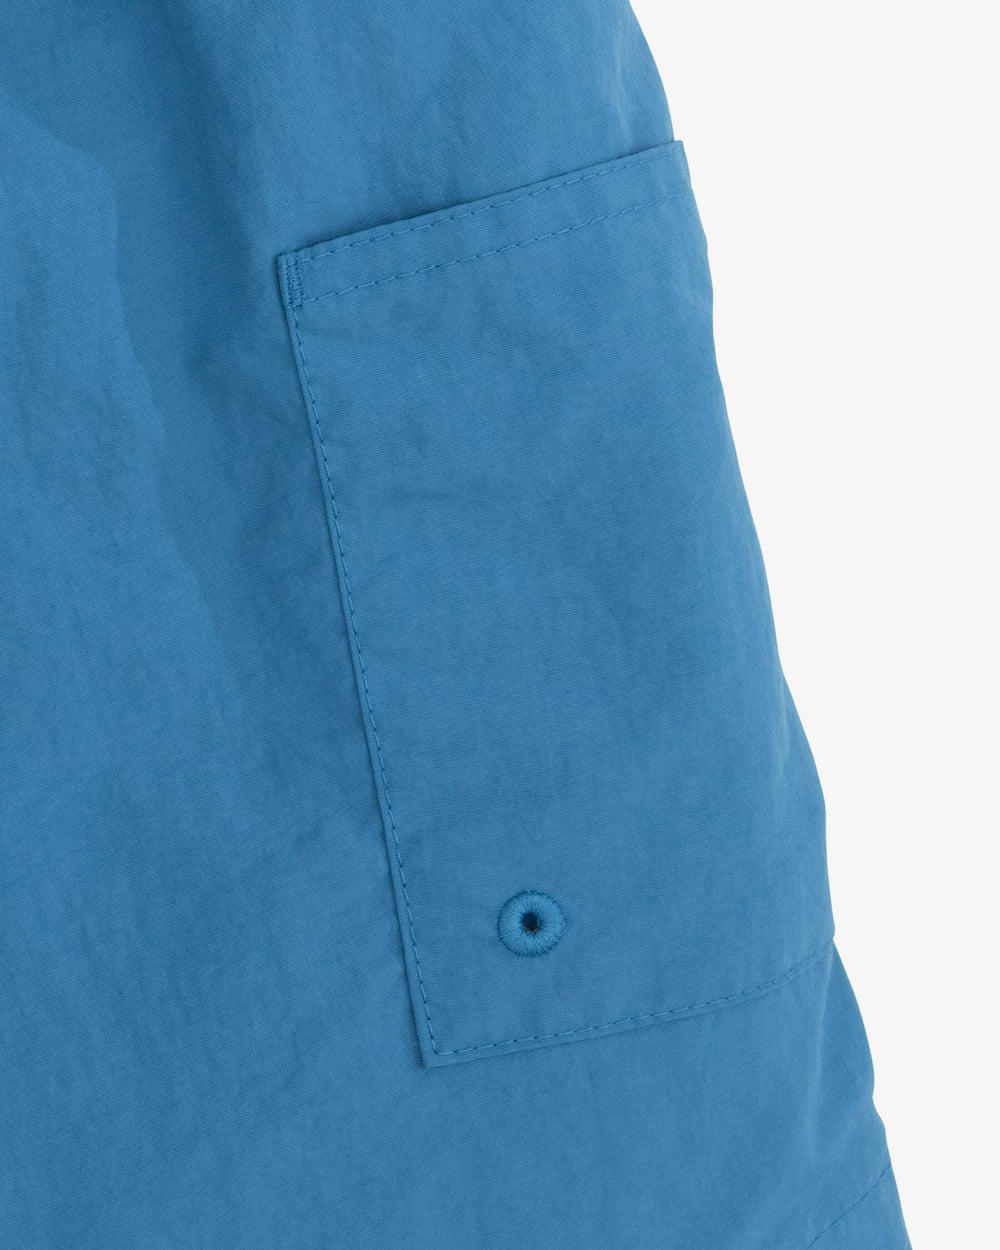 The detail view of the Southern Tide Boys Shoreline Active Short by Southern Tide - Atlantic Blue